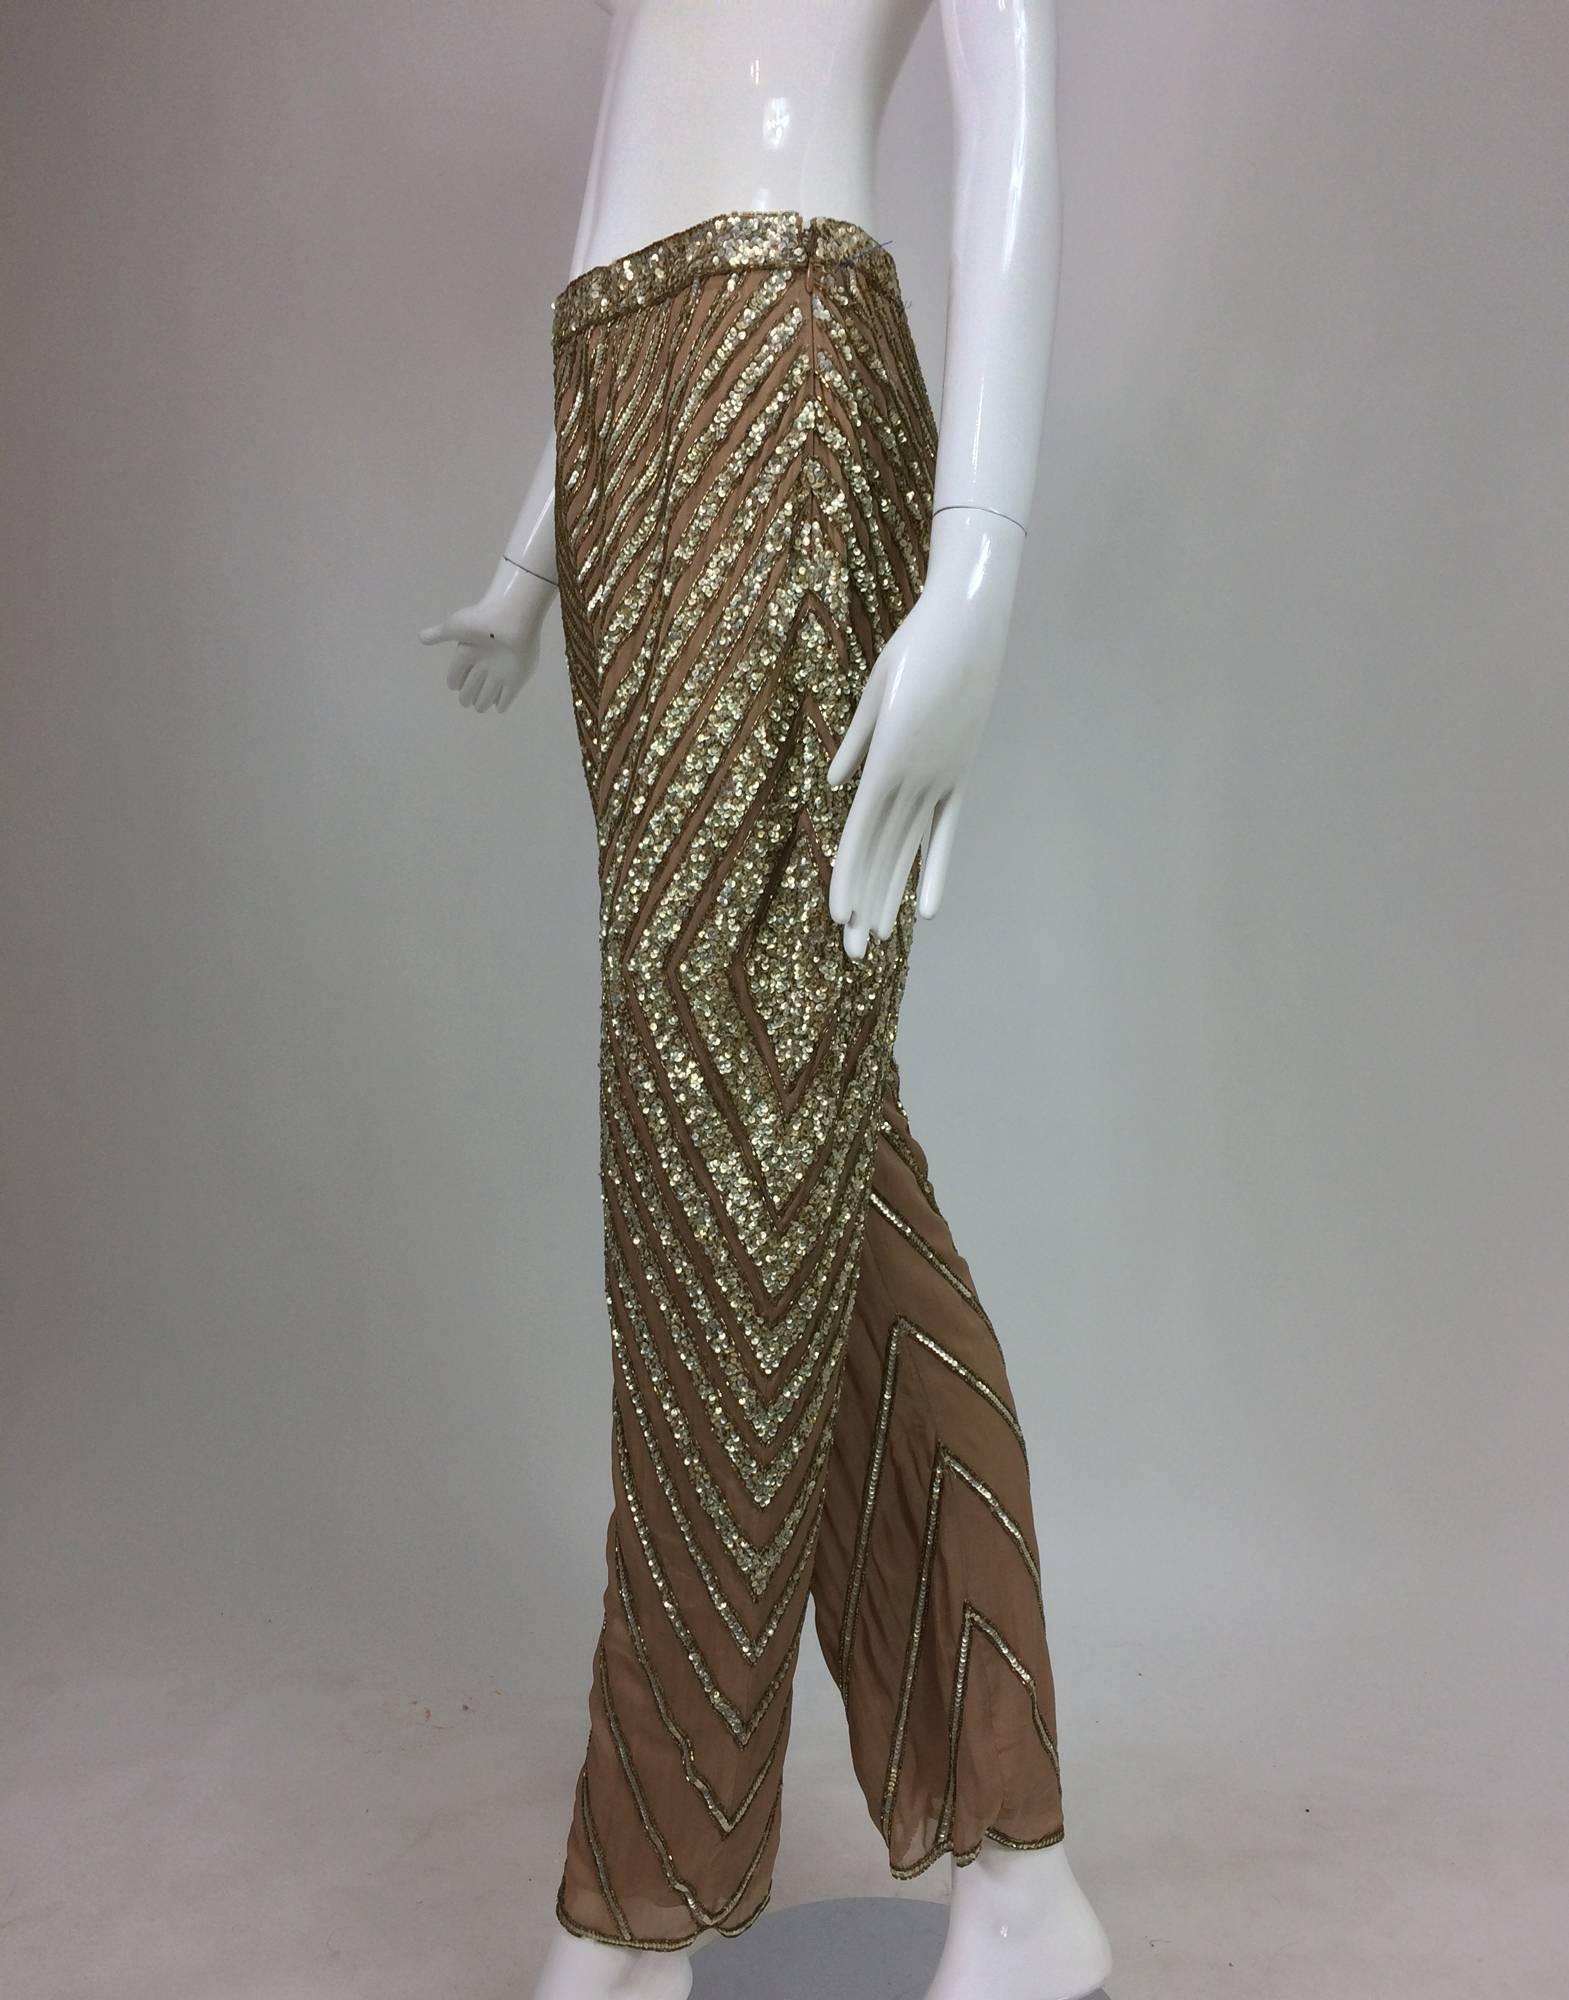 Valentino S/S 2001 nude silk chiffon gold bead silver sequin trouser look number 57...These gorgeous trousers sit just below the natural waistline...Tapered leg...Double lined in silk chiffon...Sequin waist band...Closes at the side with a zipper